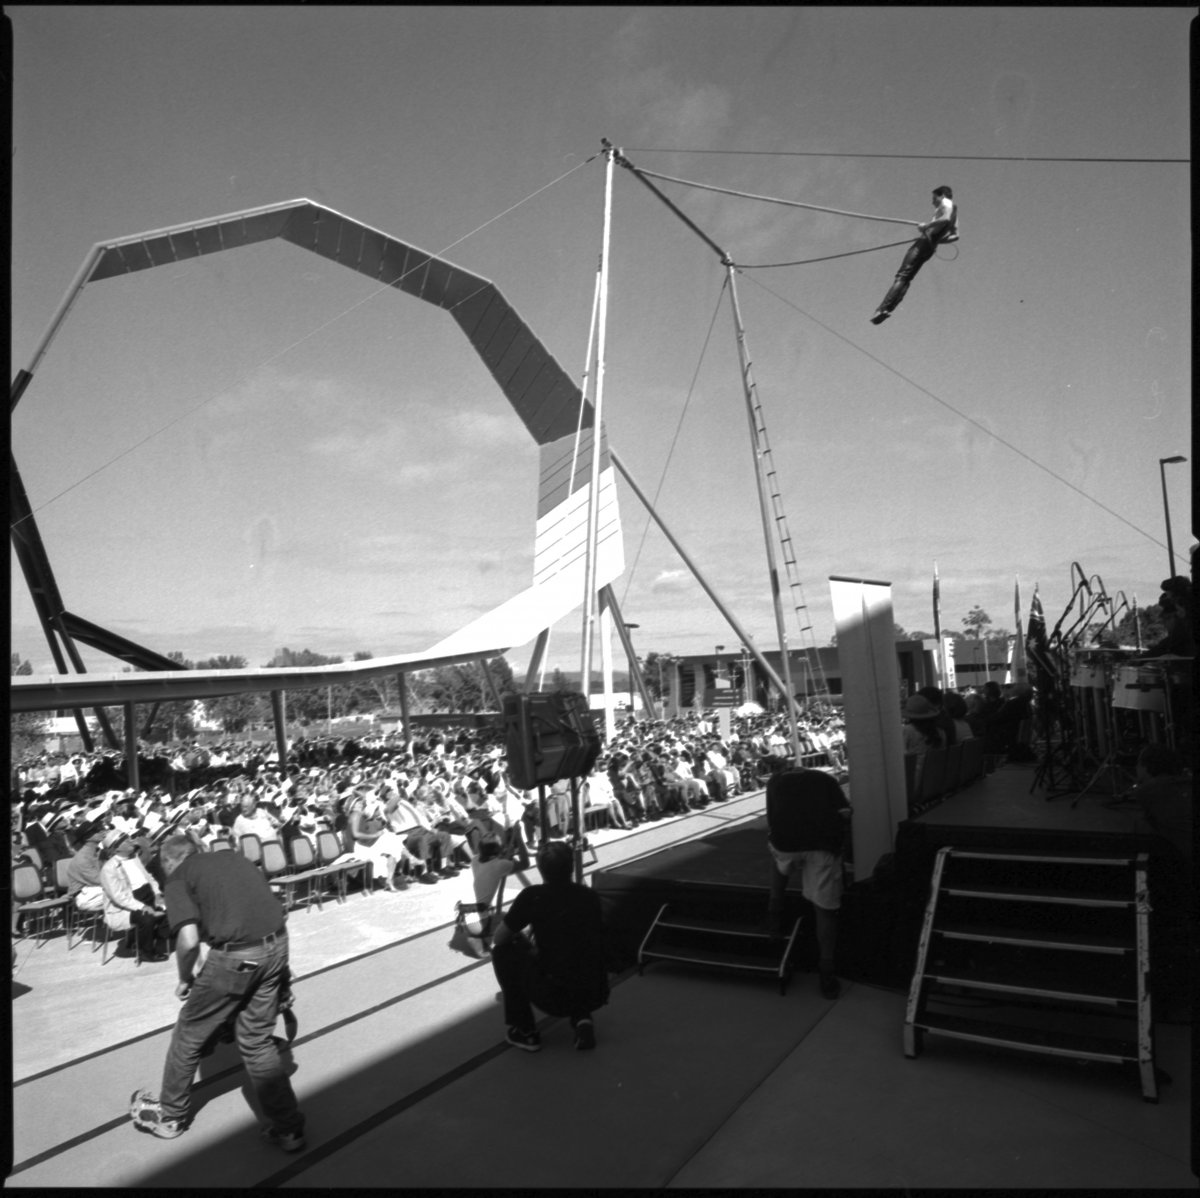 A black and white photograph of circus performers on a trapeze in the grounds of the National Museum of Australia